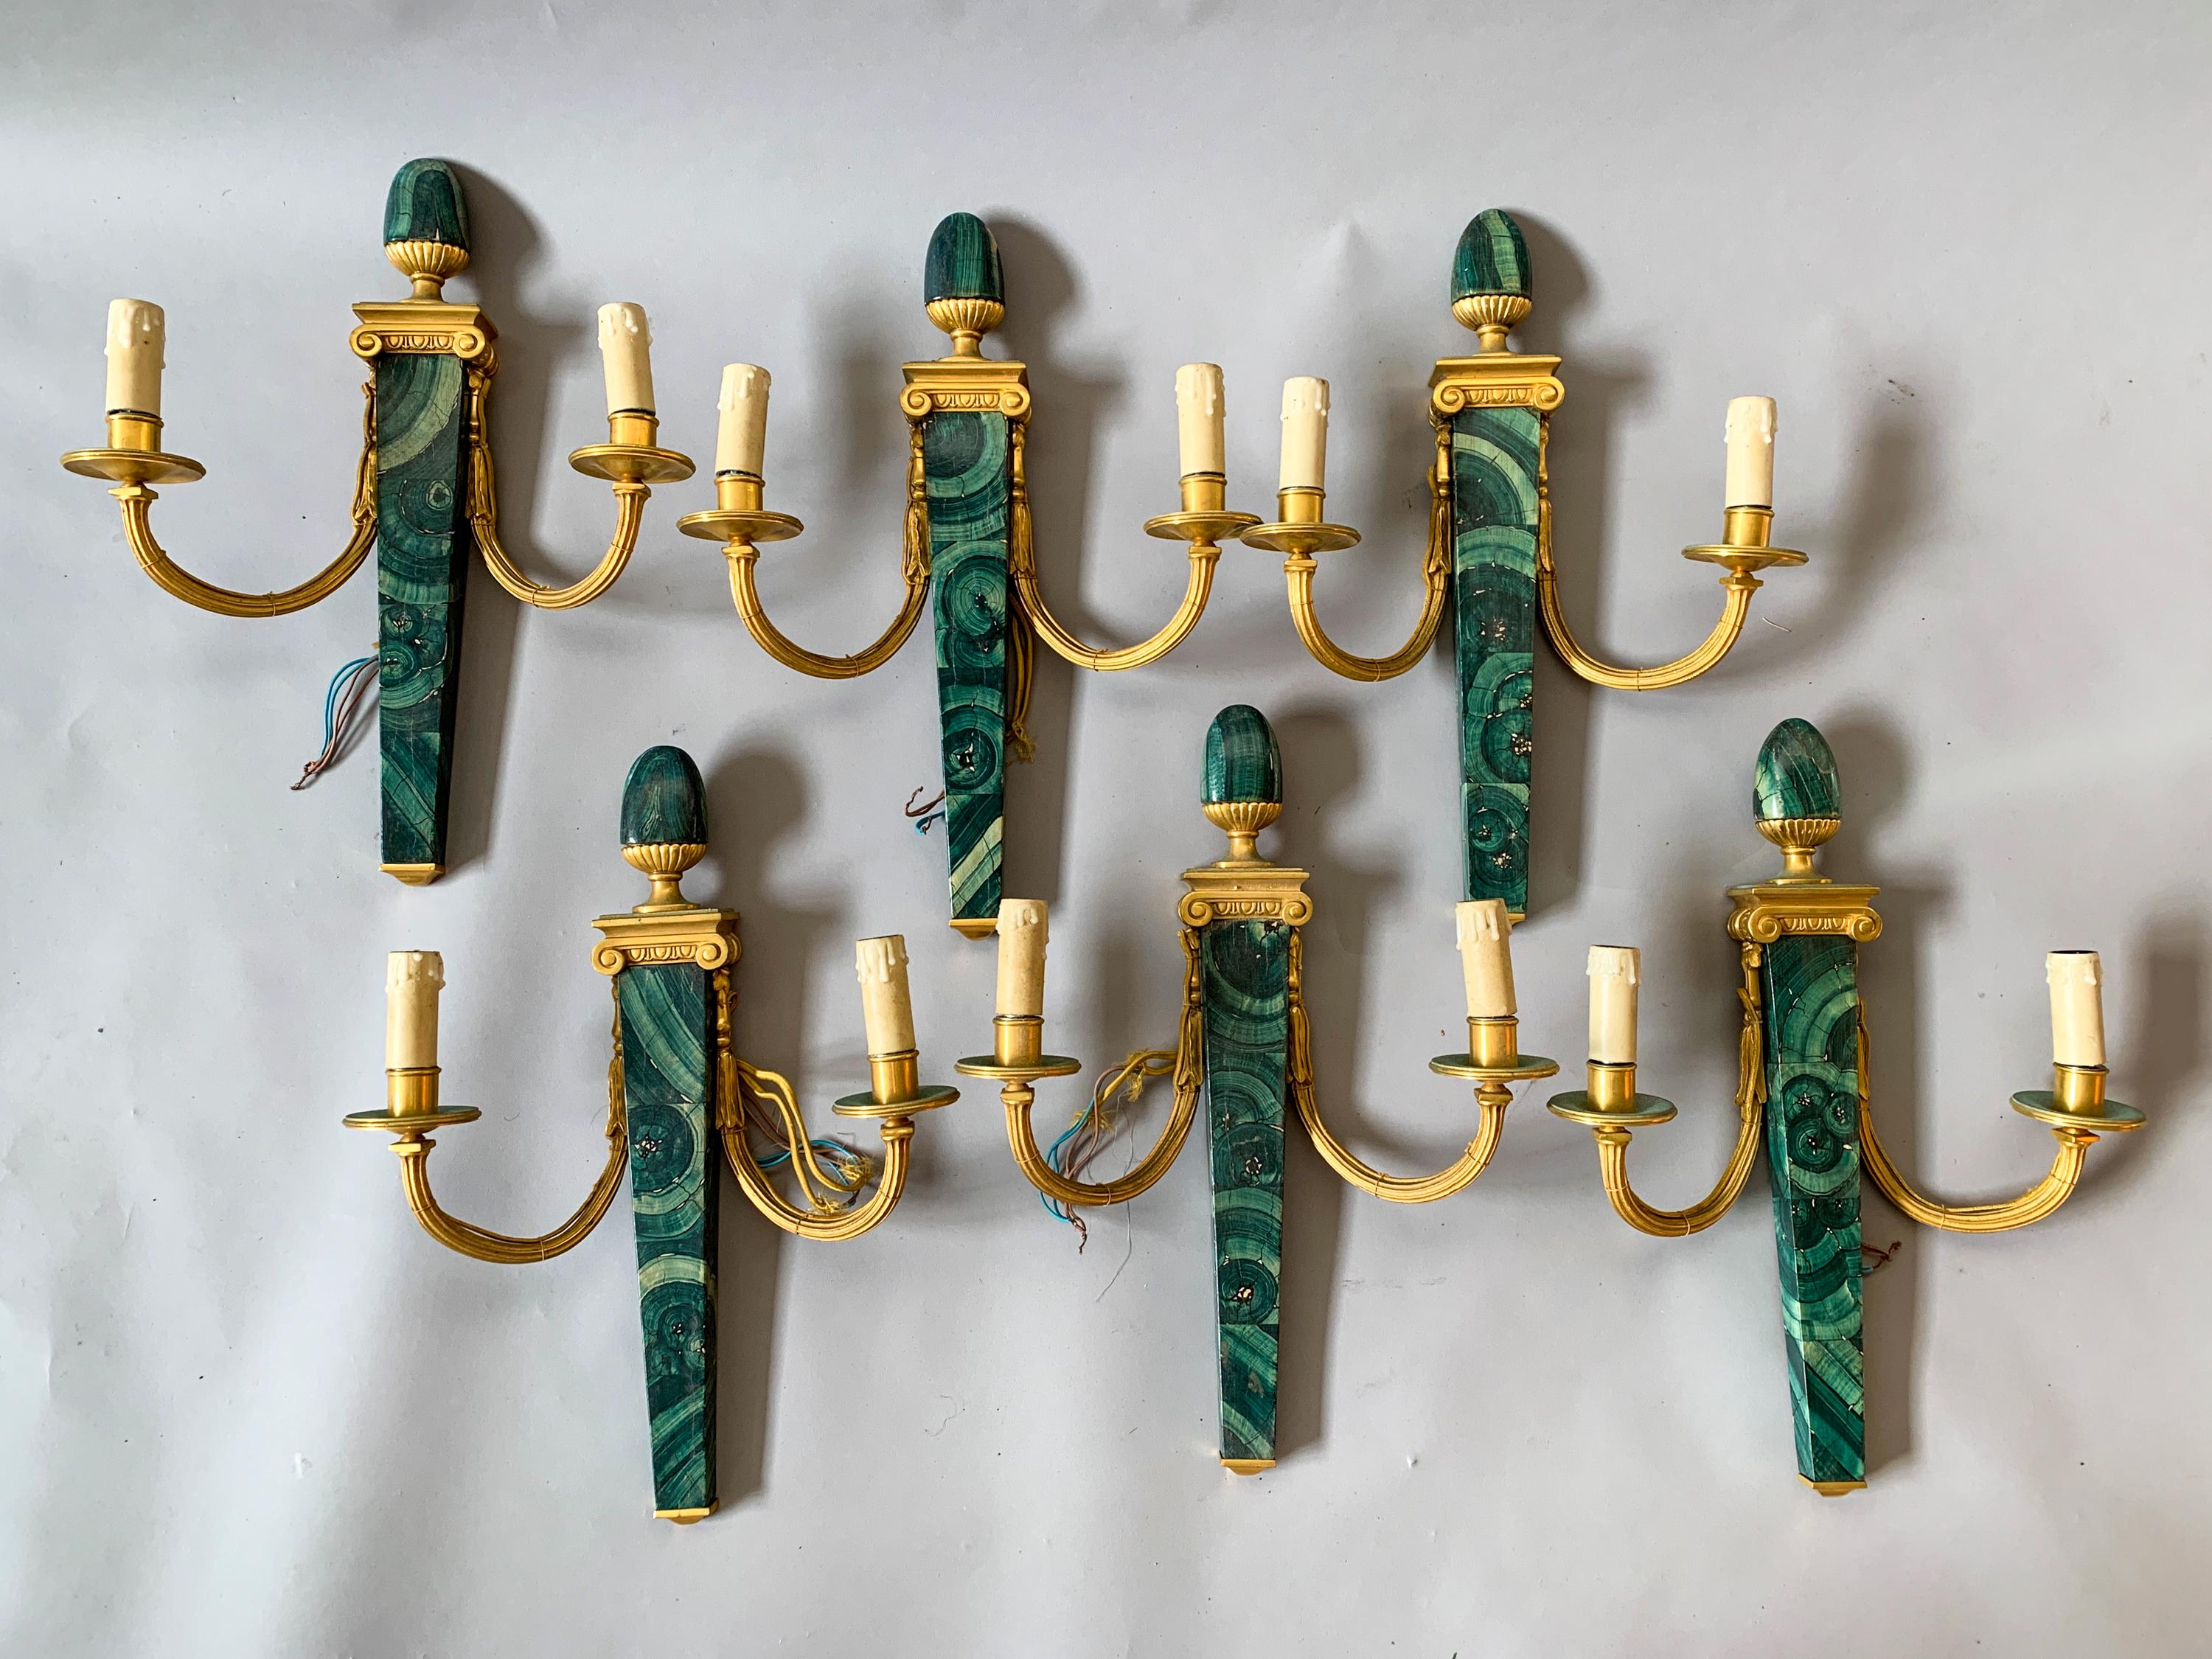 (6) 1920s faux Malachite hand painted wood and gold ormolu wall sconces with fluted and curved arms and finial to top. High quality construction. Heavy and sturdy. Price is per item.